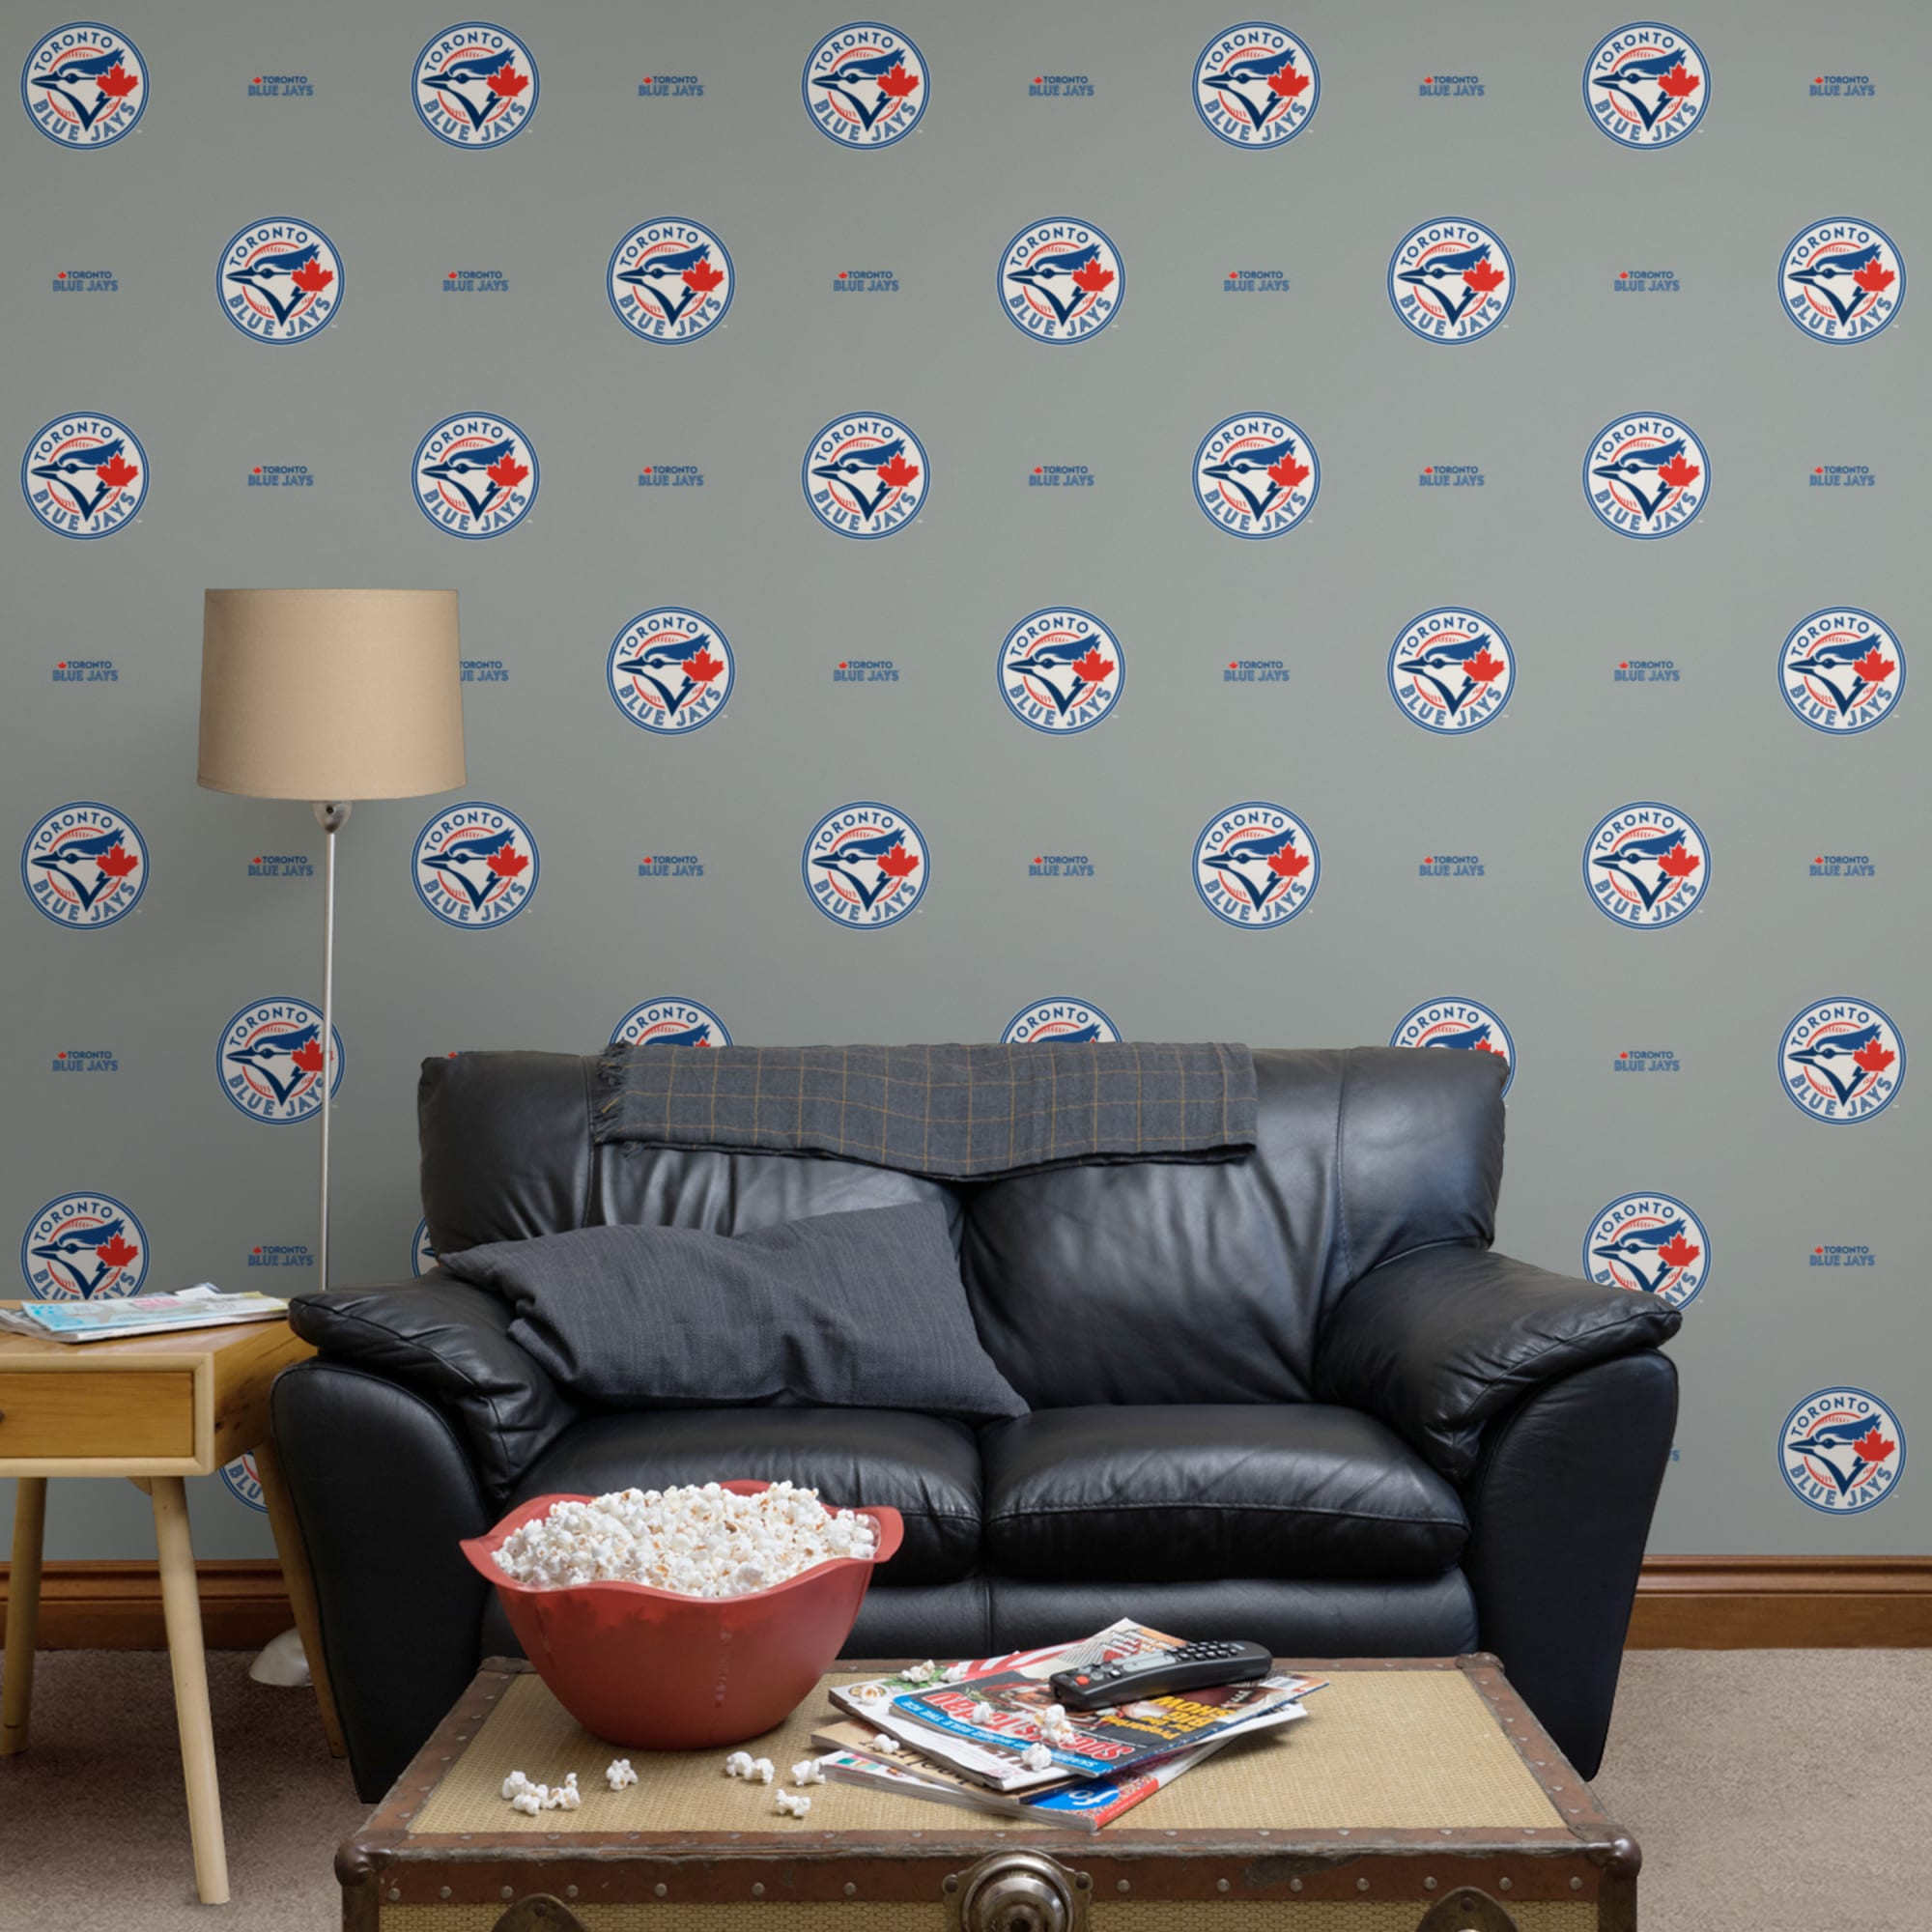 Toronto Blue Jays: Logo Pattern - Officially Licensed Removable Wallpaper 12" x 12" Sample by Fathead